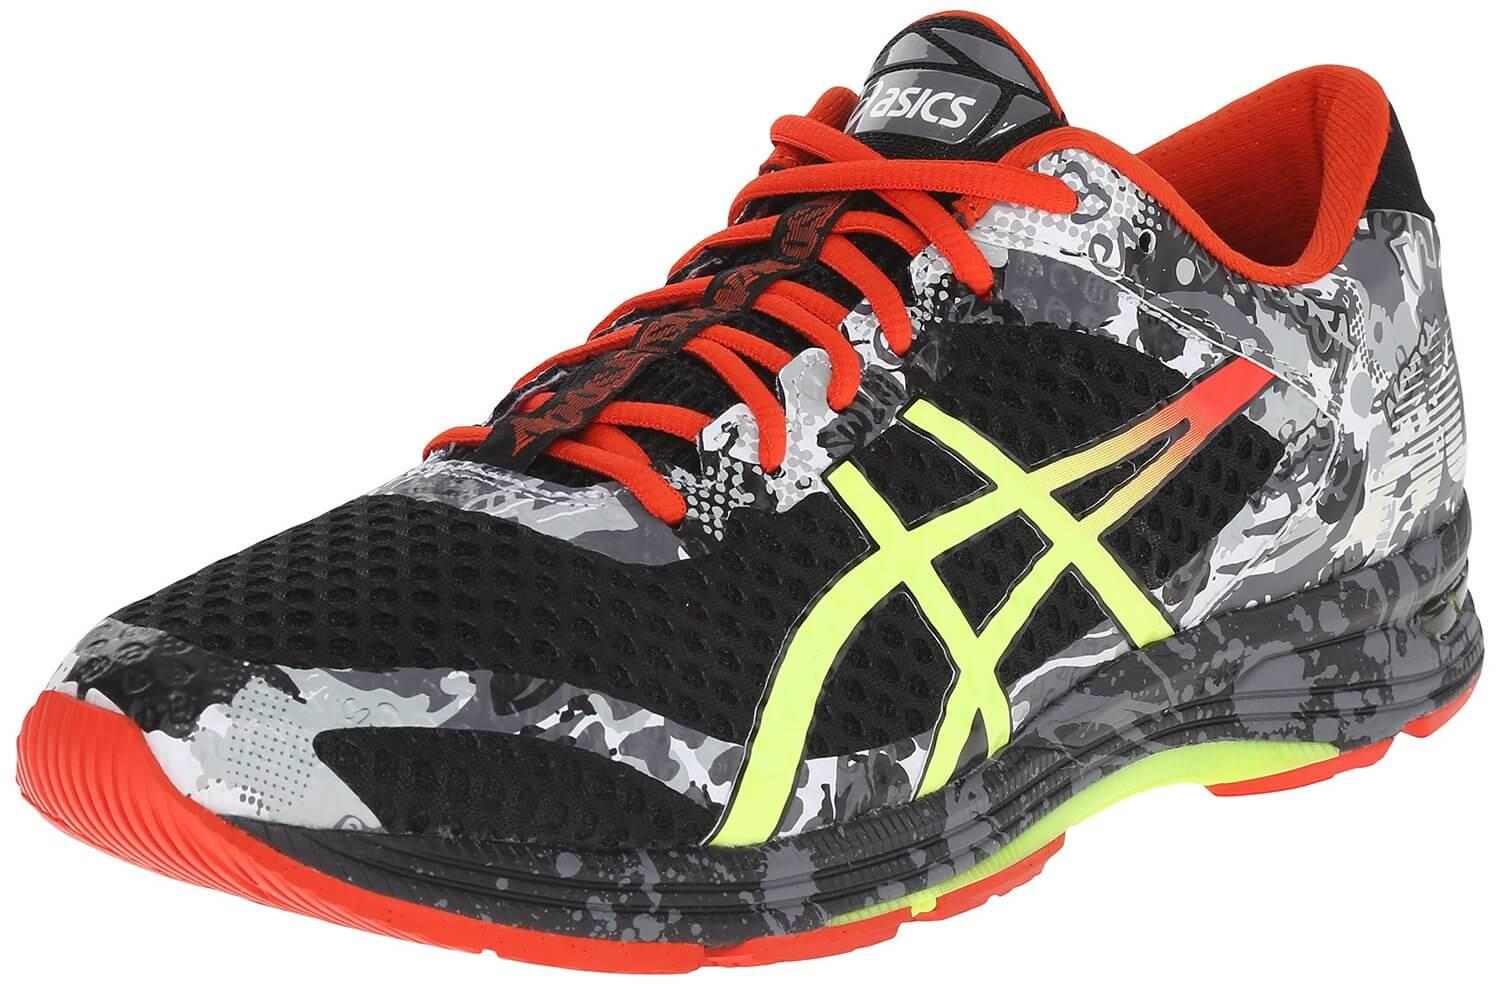 the Asics Gel Noosa Tri 11 is a mid-stability shoe that offers a great amount of comfort